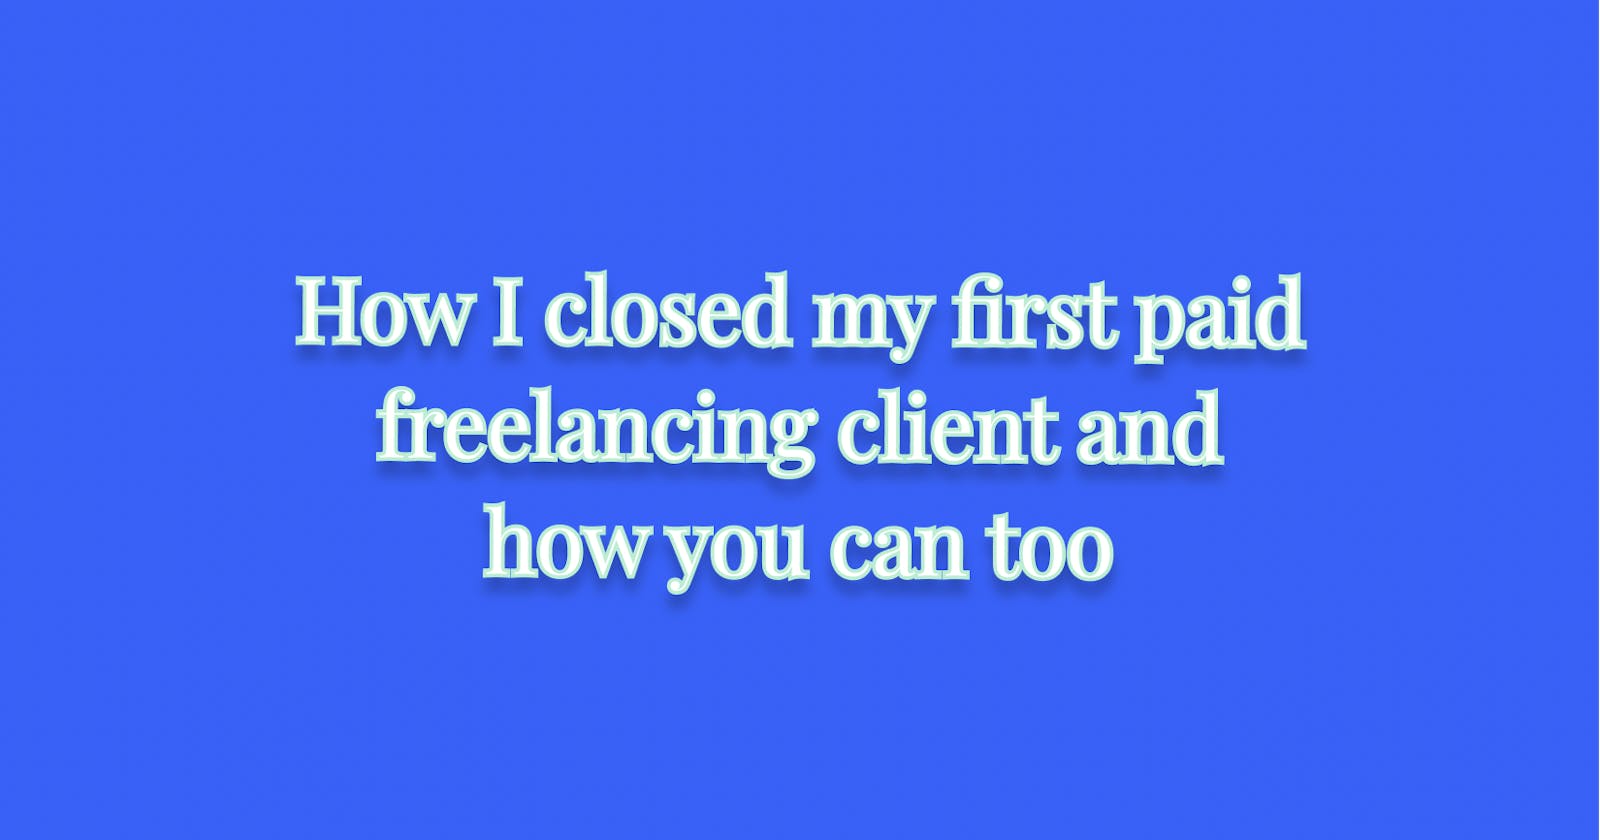 How I closed my first paid freelancing client and how you can too